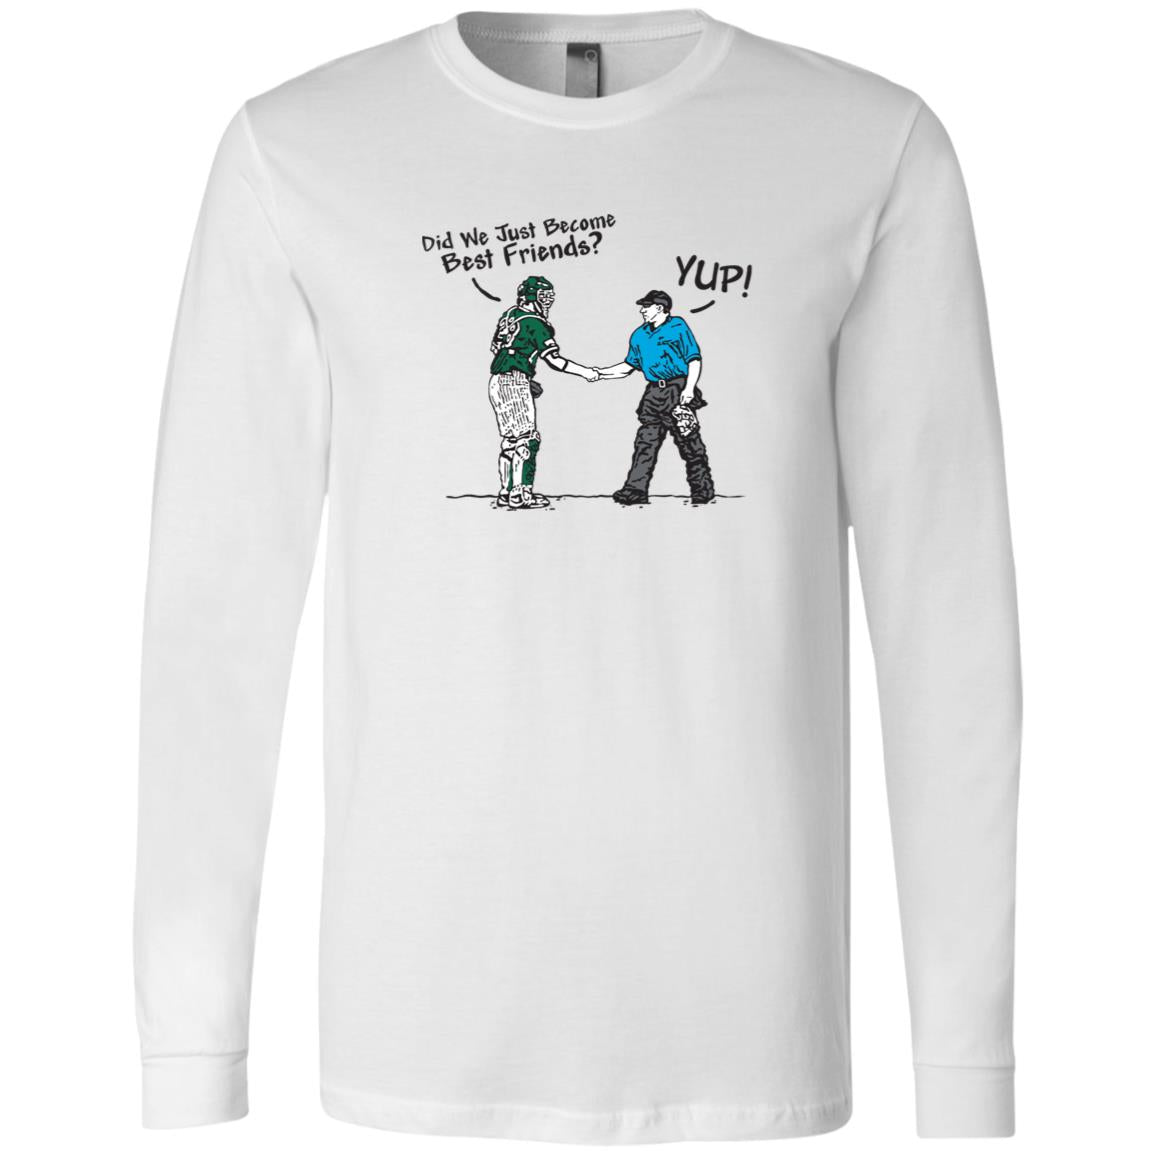 The Catching Guy Best Friends Men's Jersey Tee white